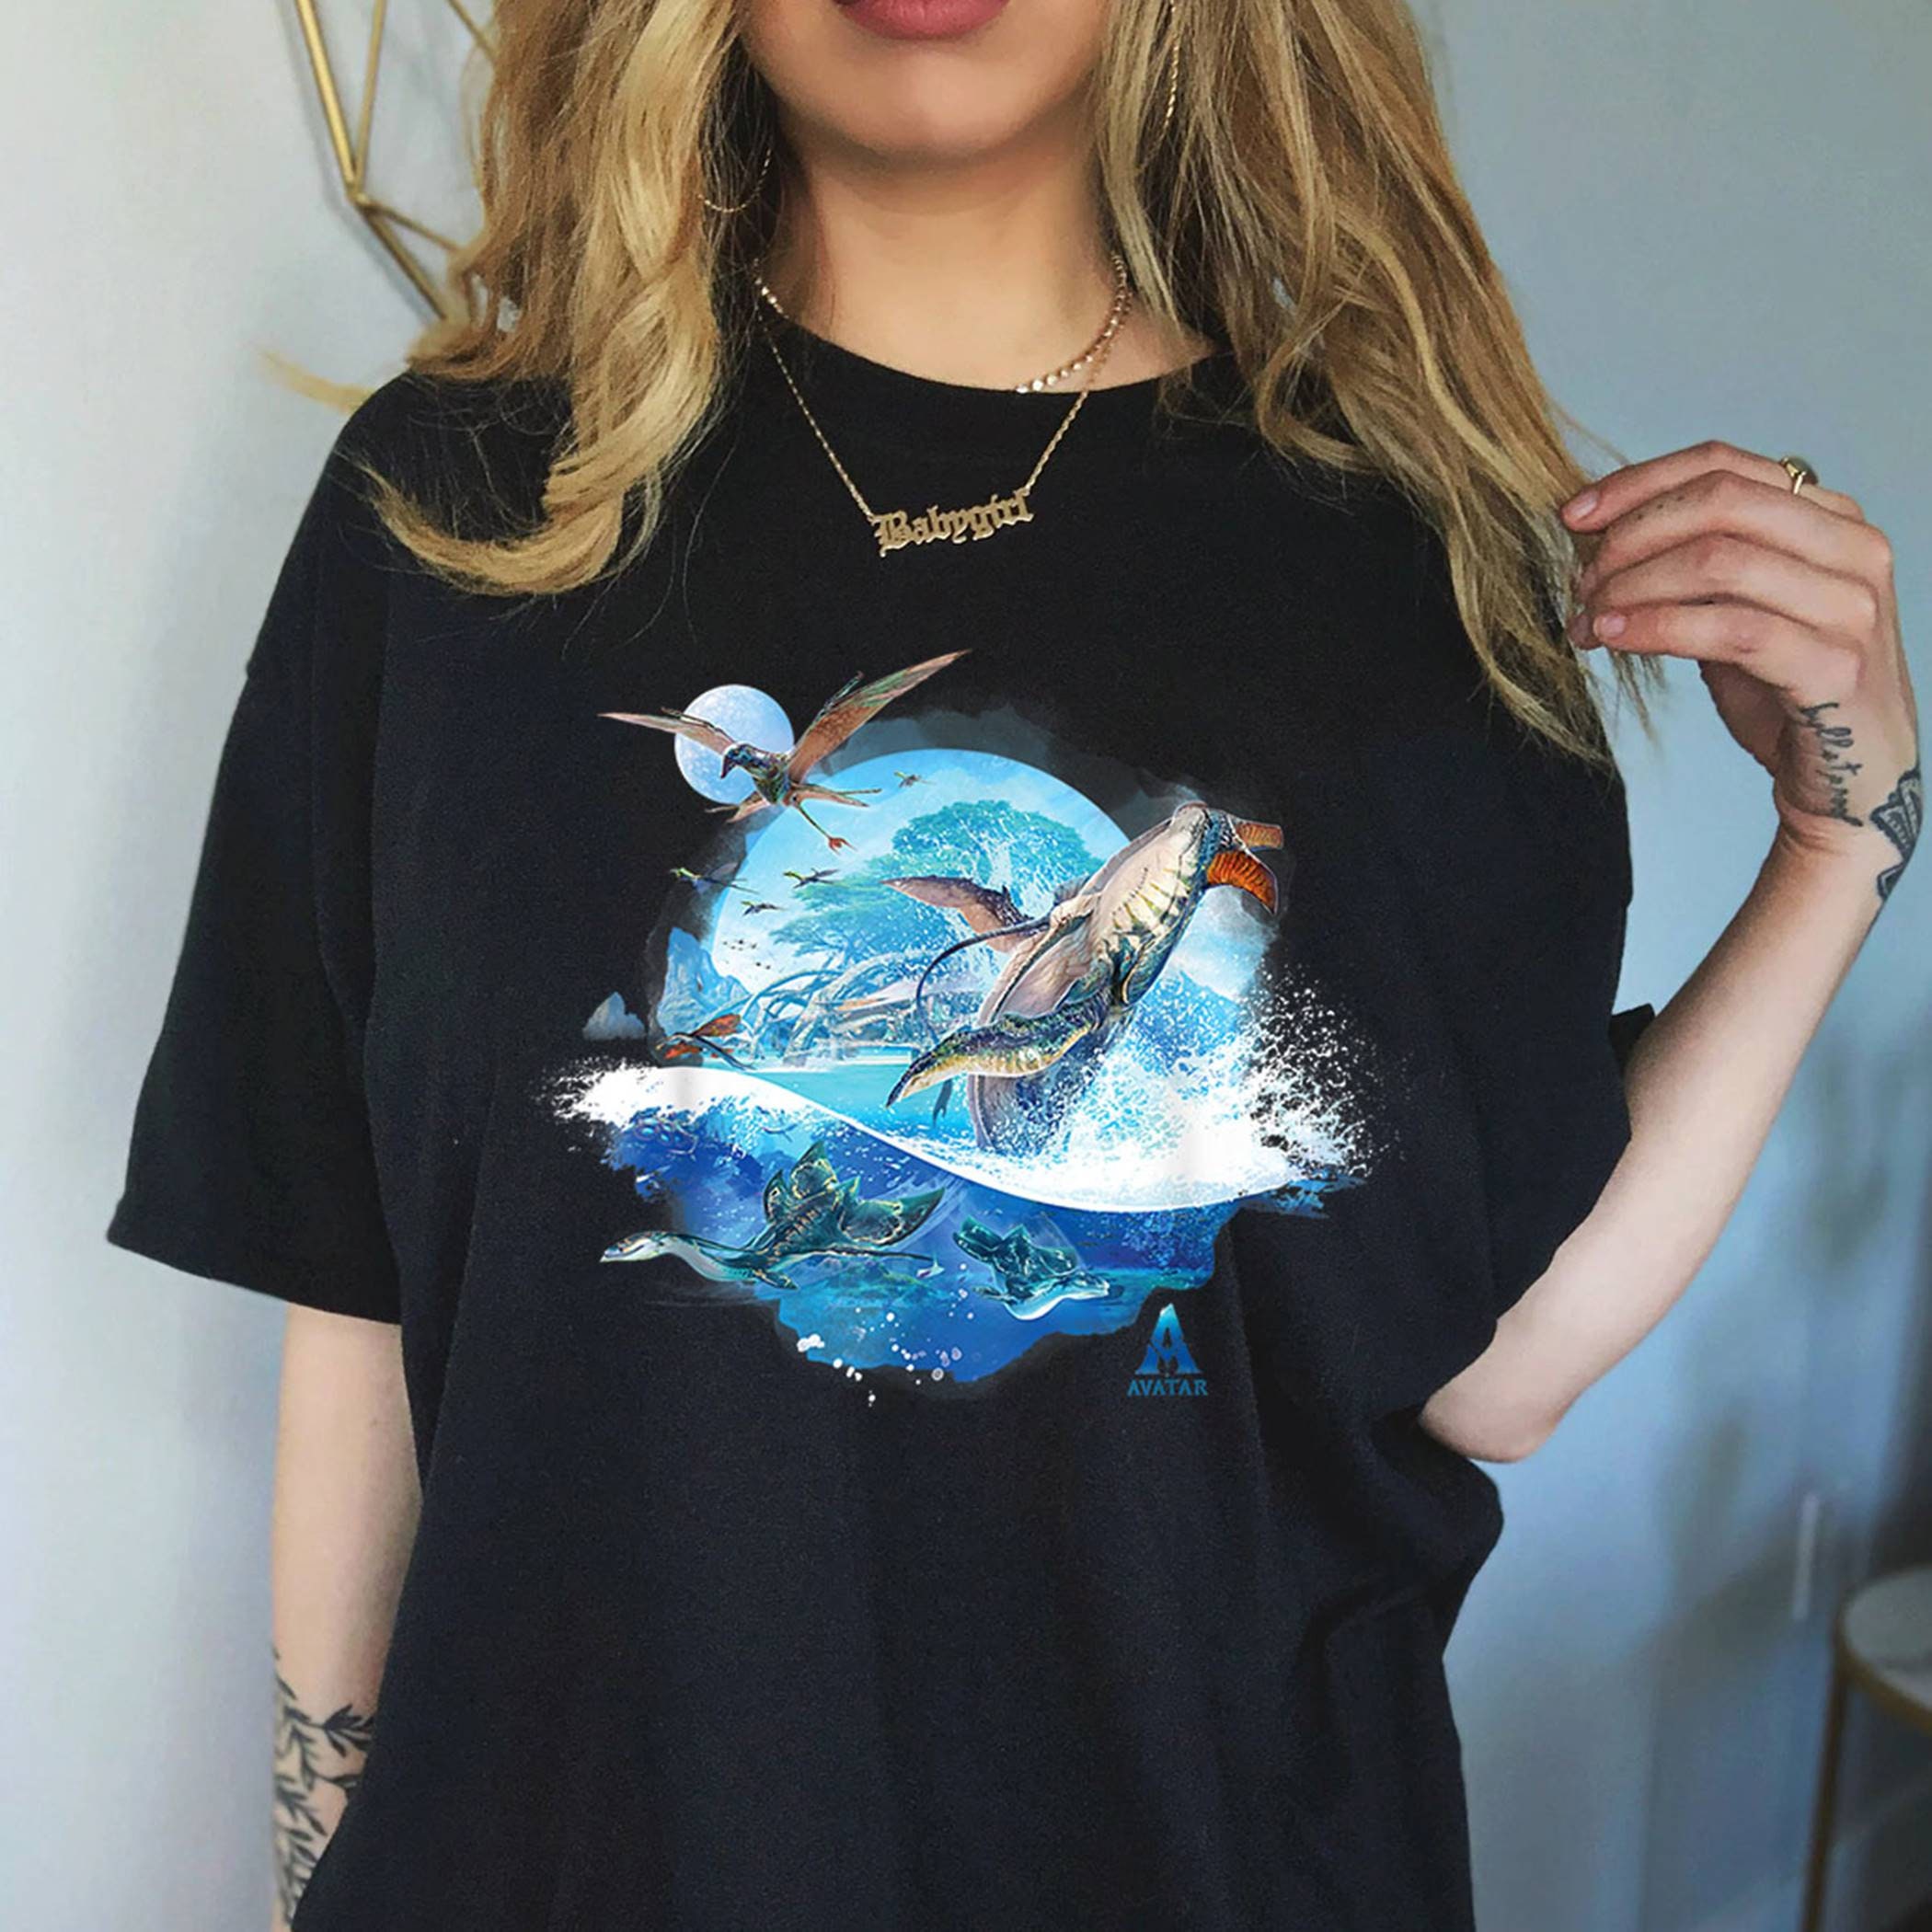 Discover Avatar Shirt Avatar 2 Shirt Avatar The Way of Water Creatures of Sea and Sky Shirt